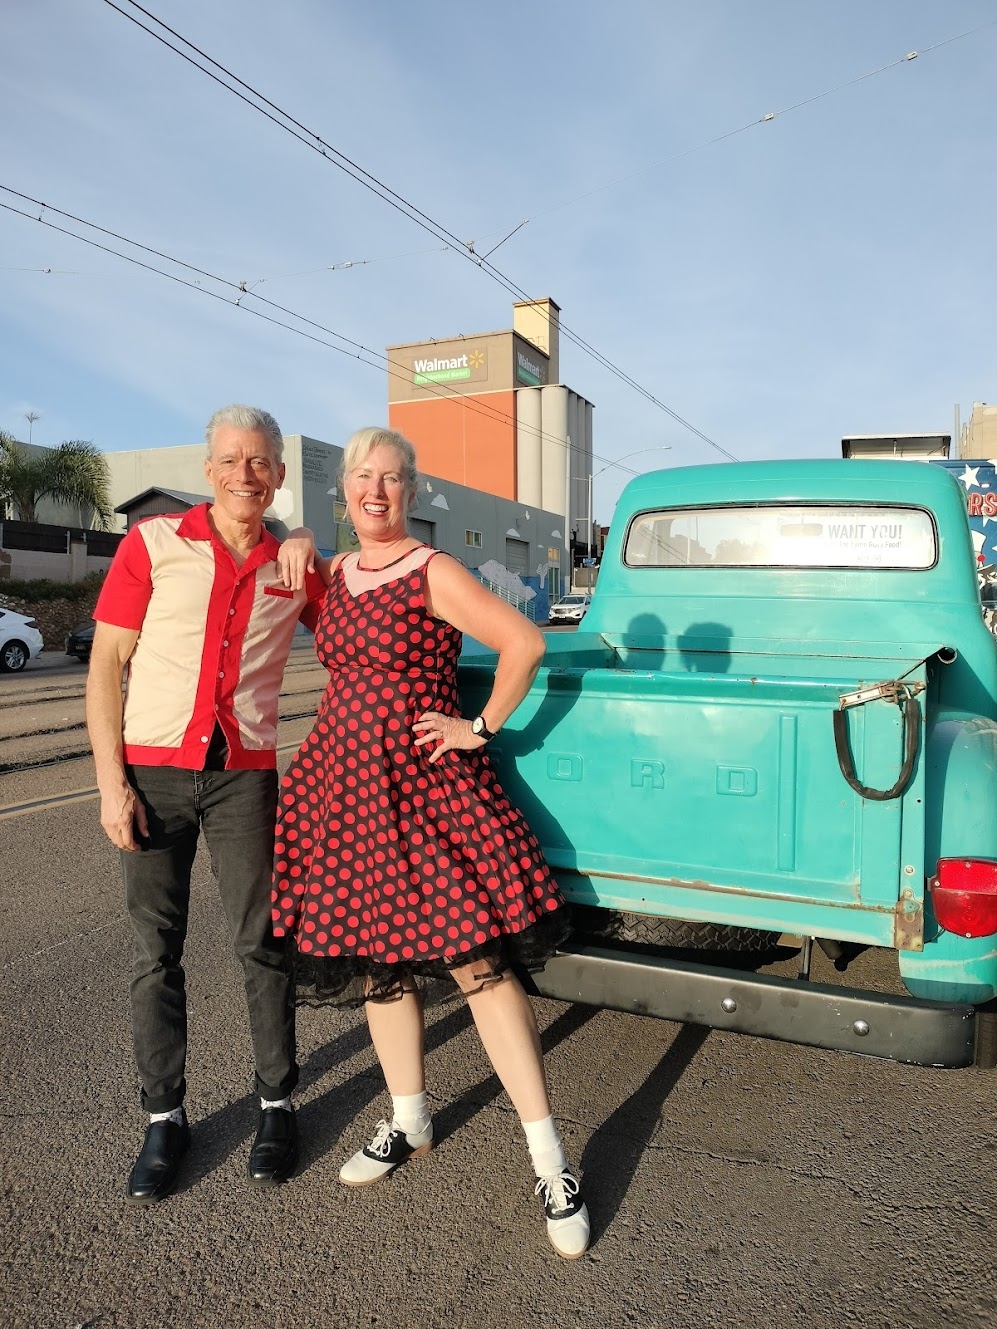 Couple in swing dancing outfits posing in front of a vintage car